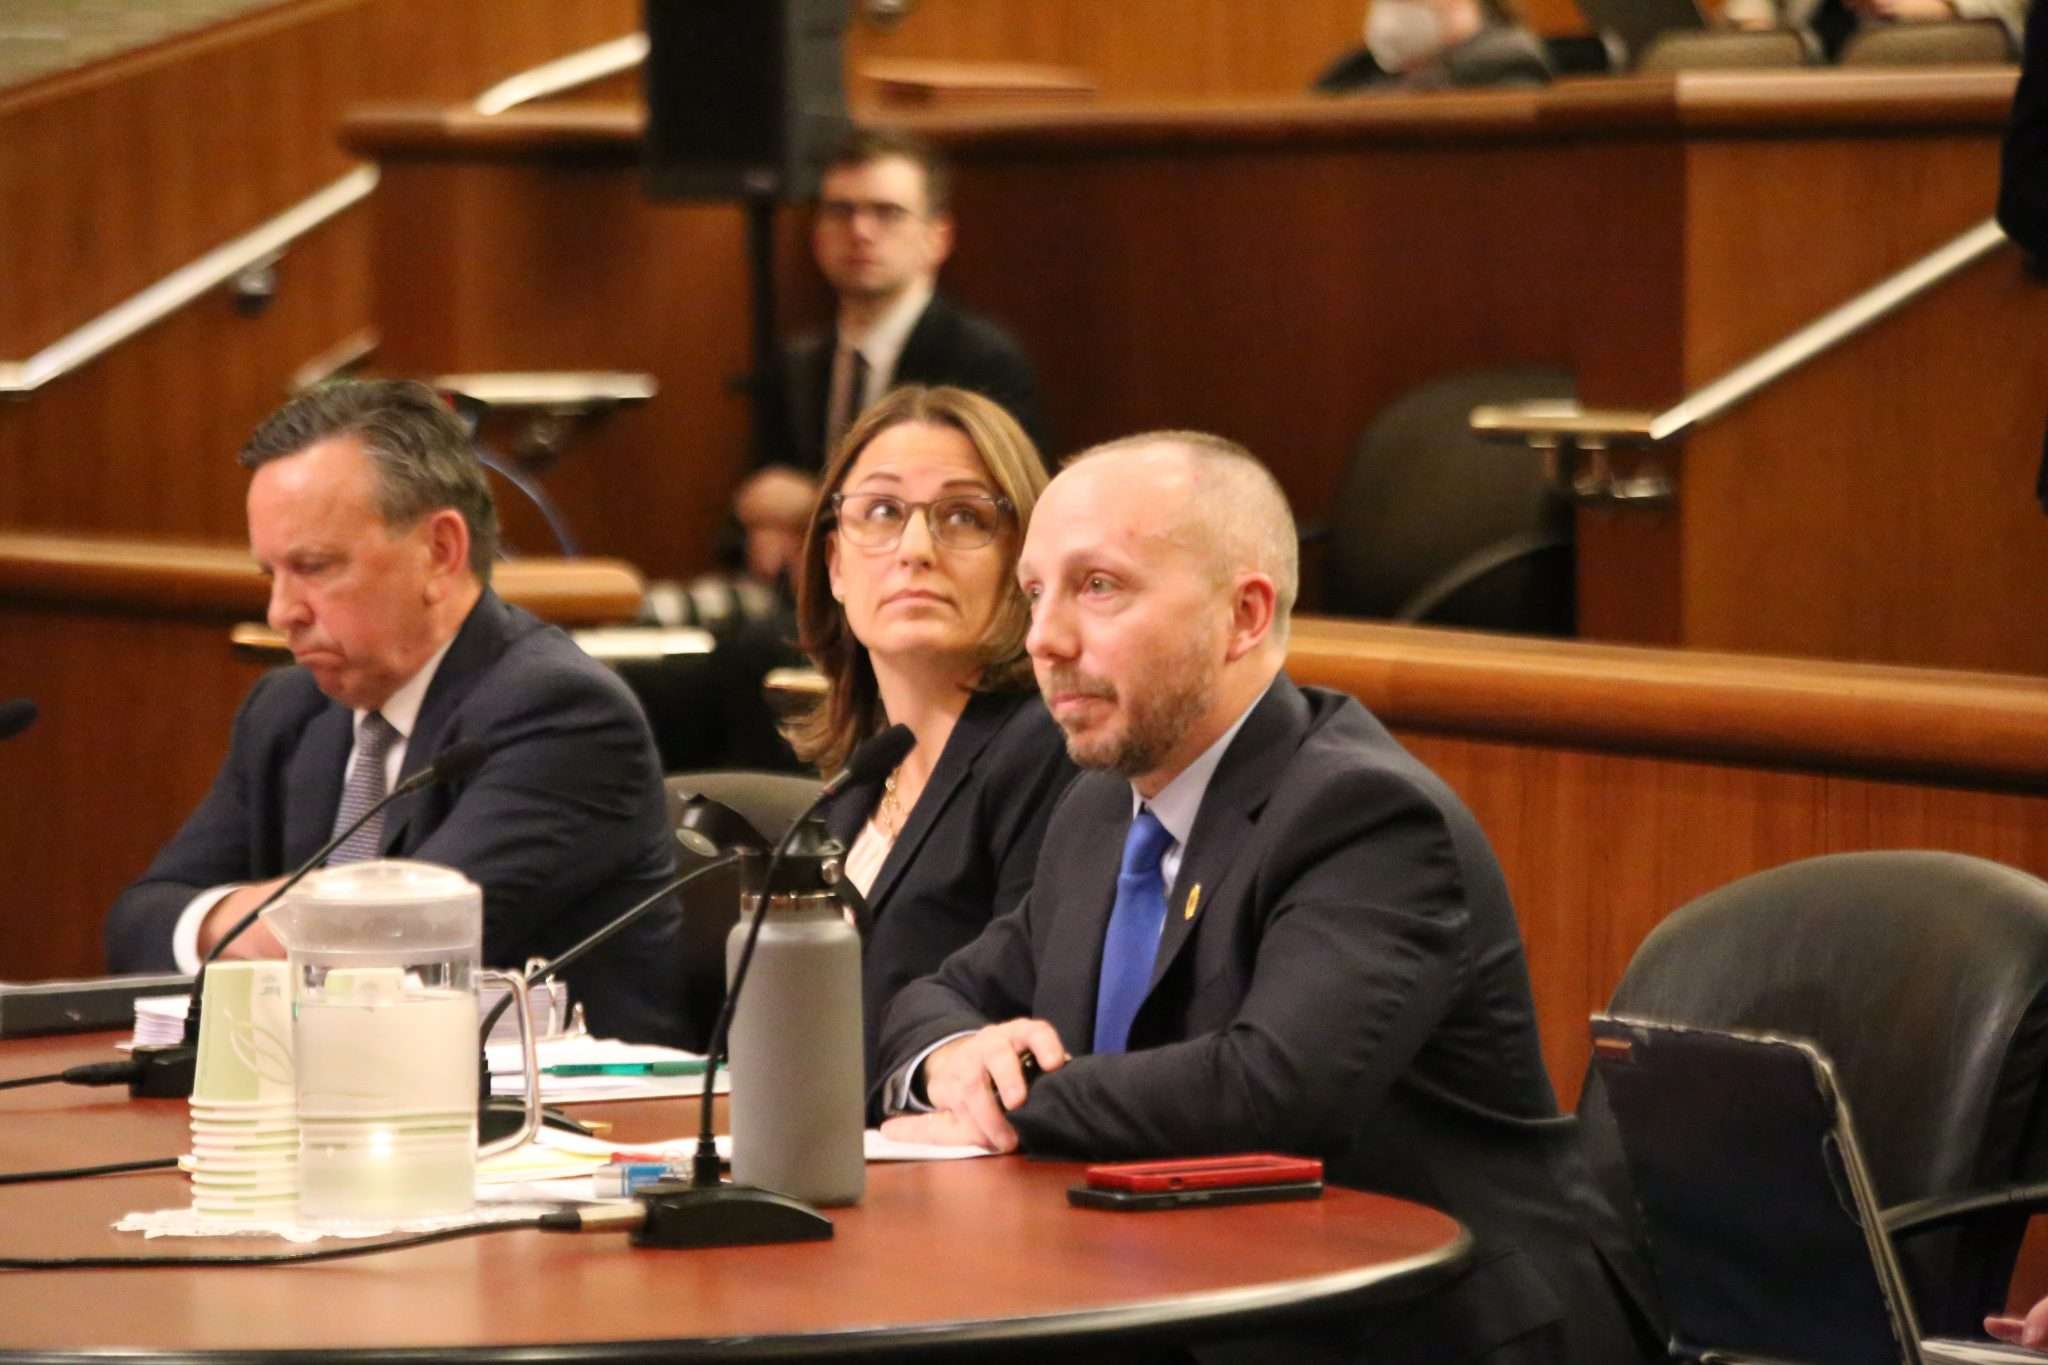 From left, Justin Driscoll, acting president and CEO of the New York Power Authority; Doreen Harris, president and CEO of the New York State Energy Research and Development Authority; and Basil Seggos, commissioner of the state Department of Environmental Conservation, testify before lawmakers during a joint budget hearing on Feb. 14 in the New York State Capitol in Albany.